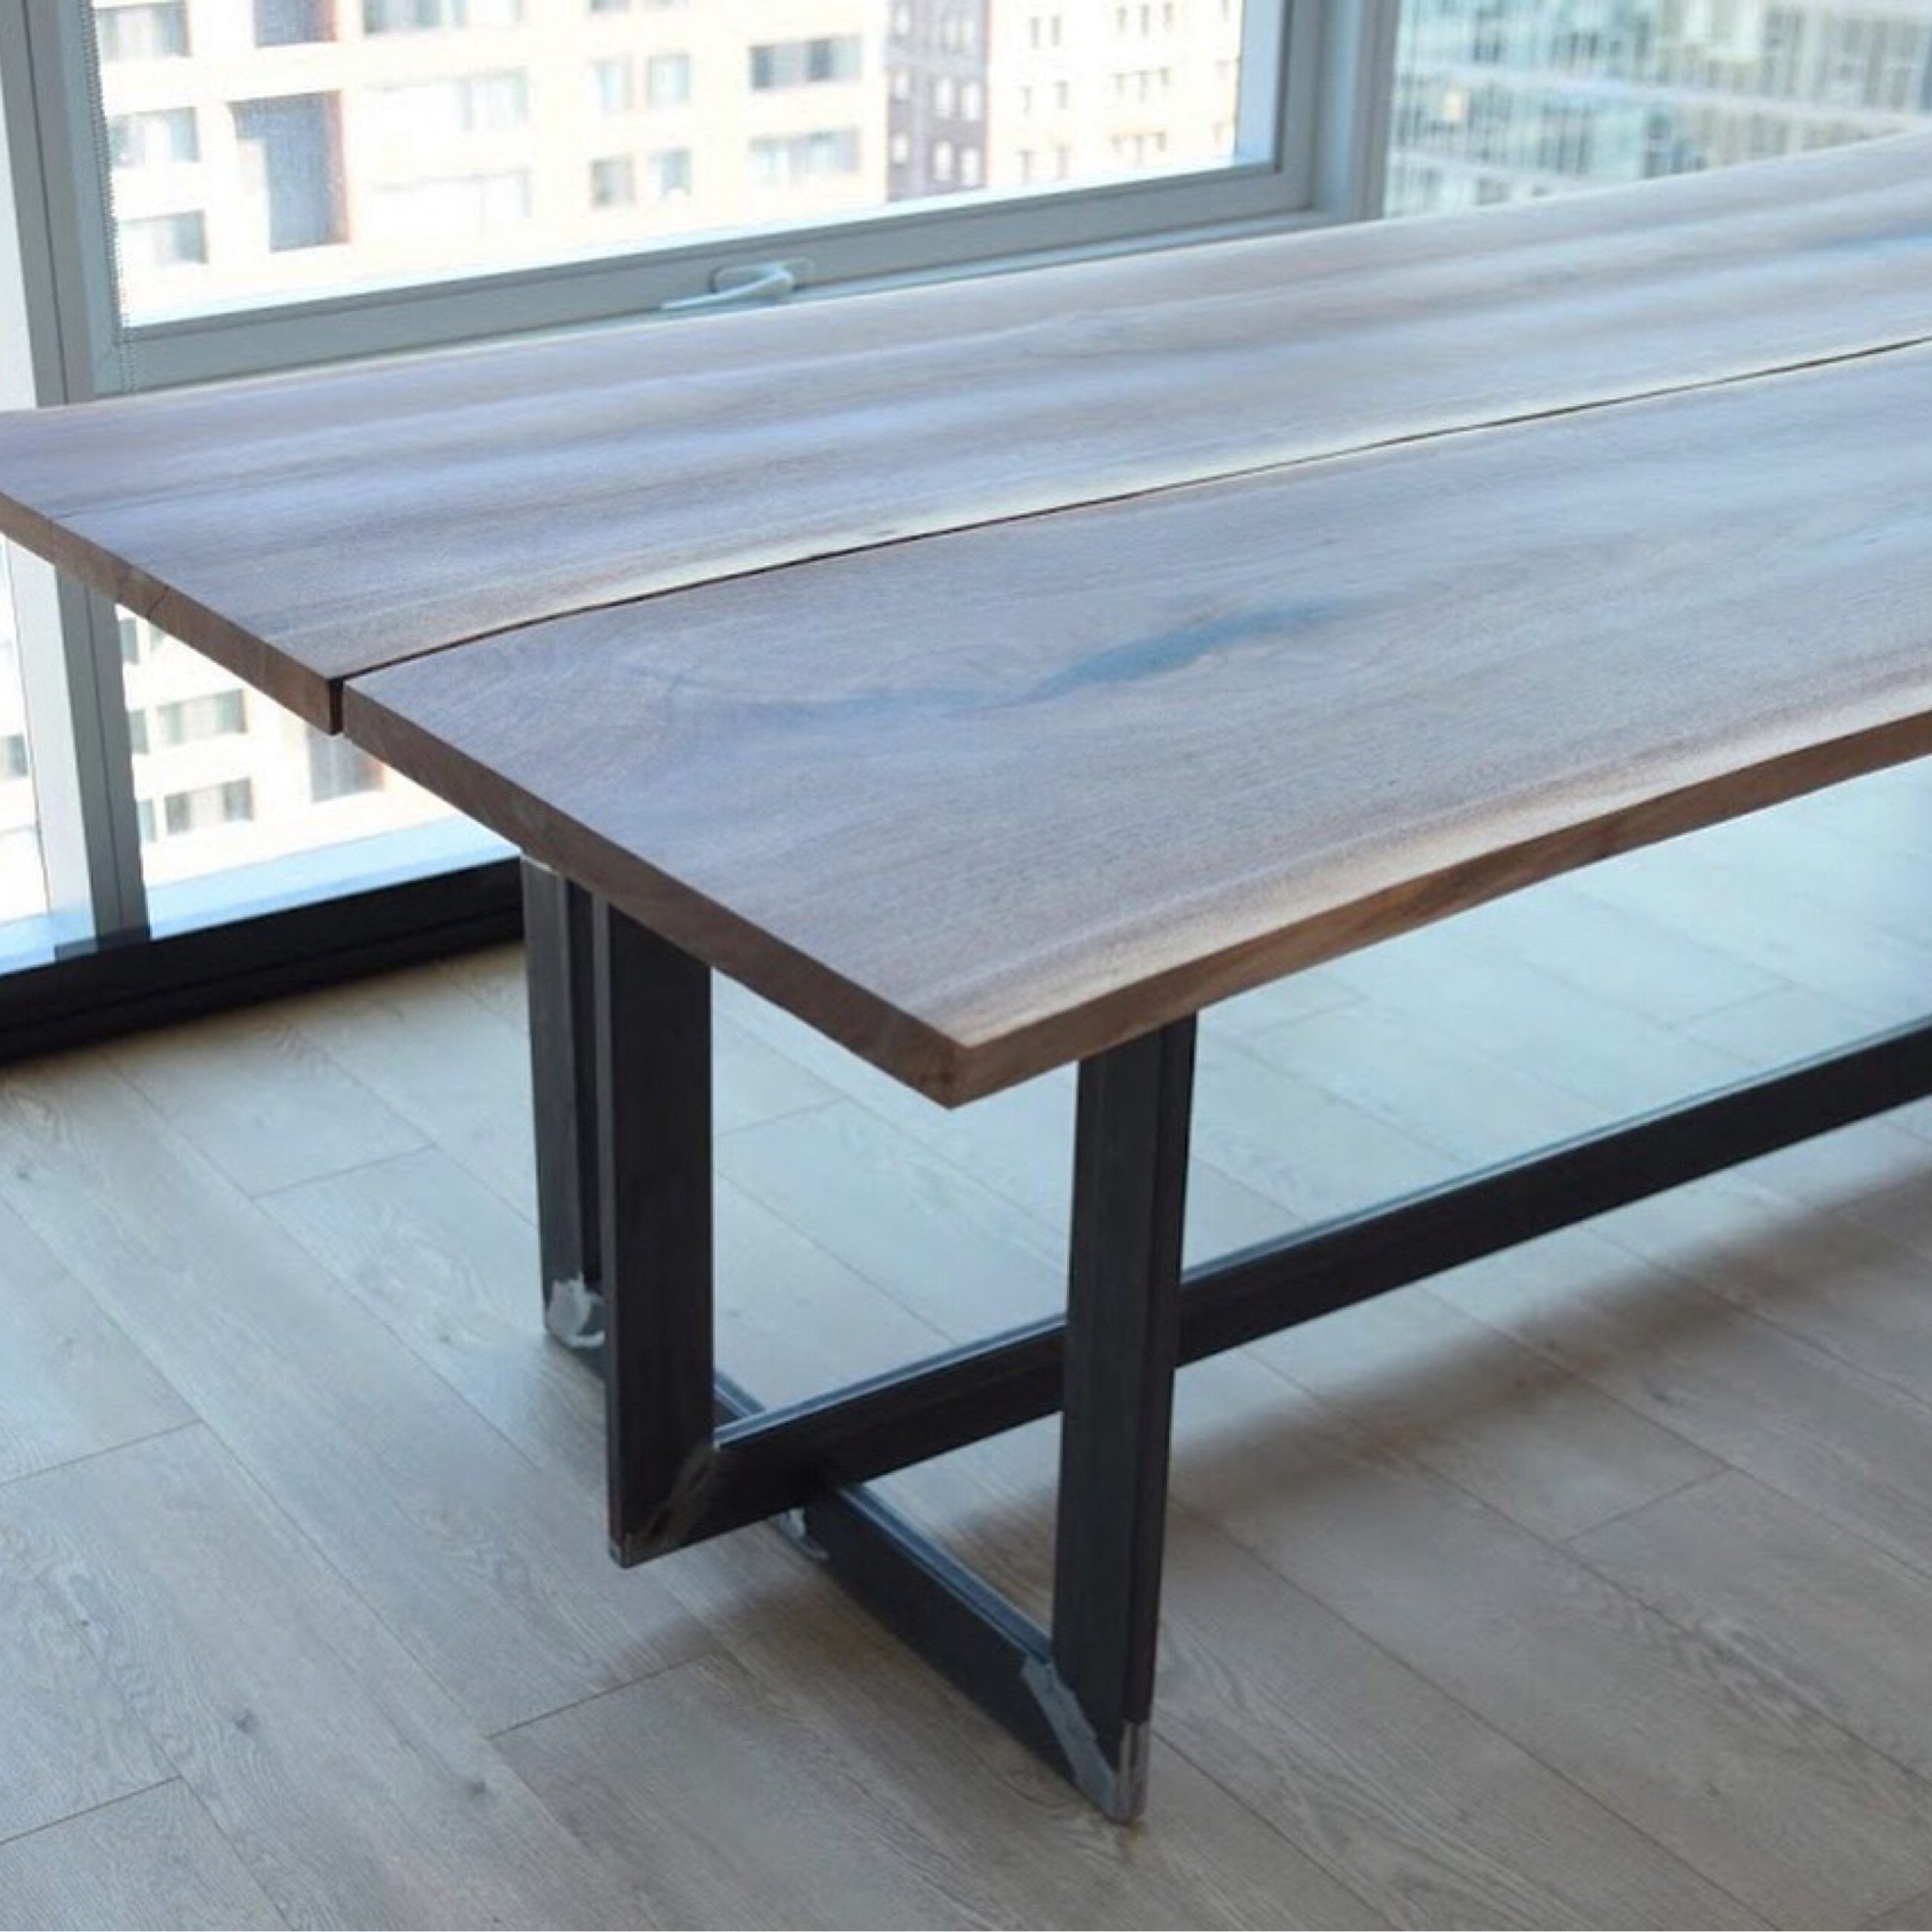 Latest Dark Walnut Drink Tables Pertaining To Black Walnut Live Edge Dining Table, Black Walnut Table (View 3 of 20)